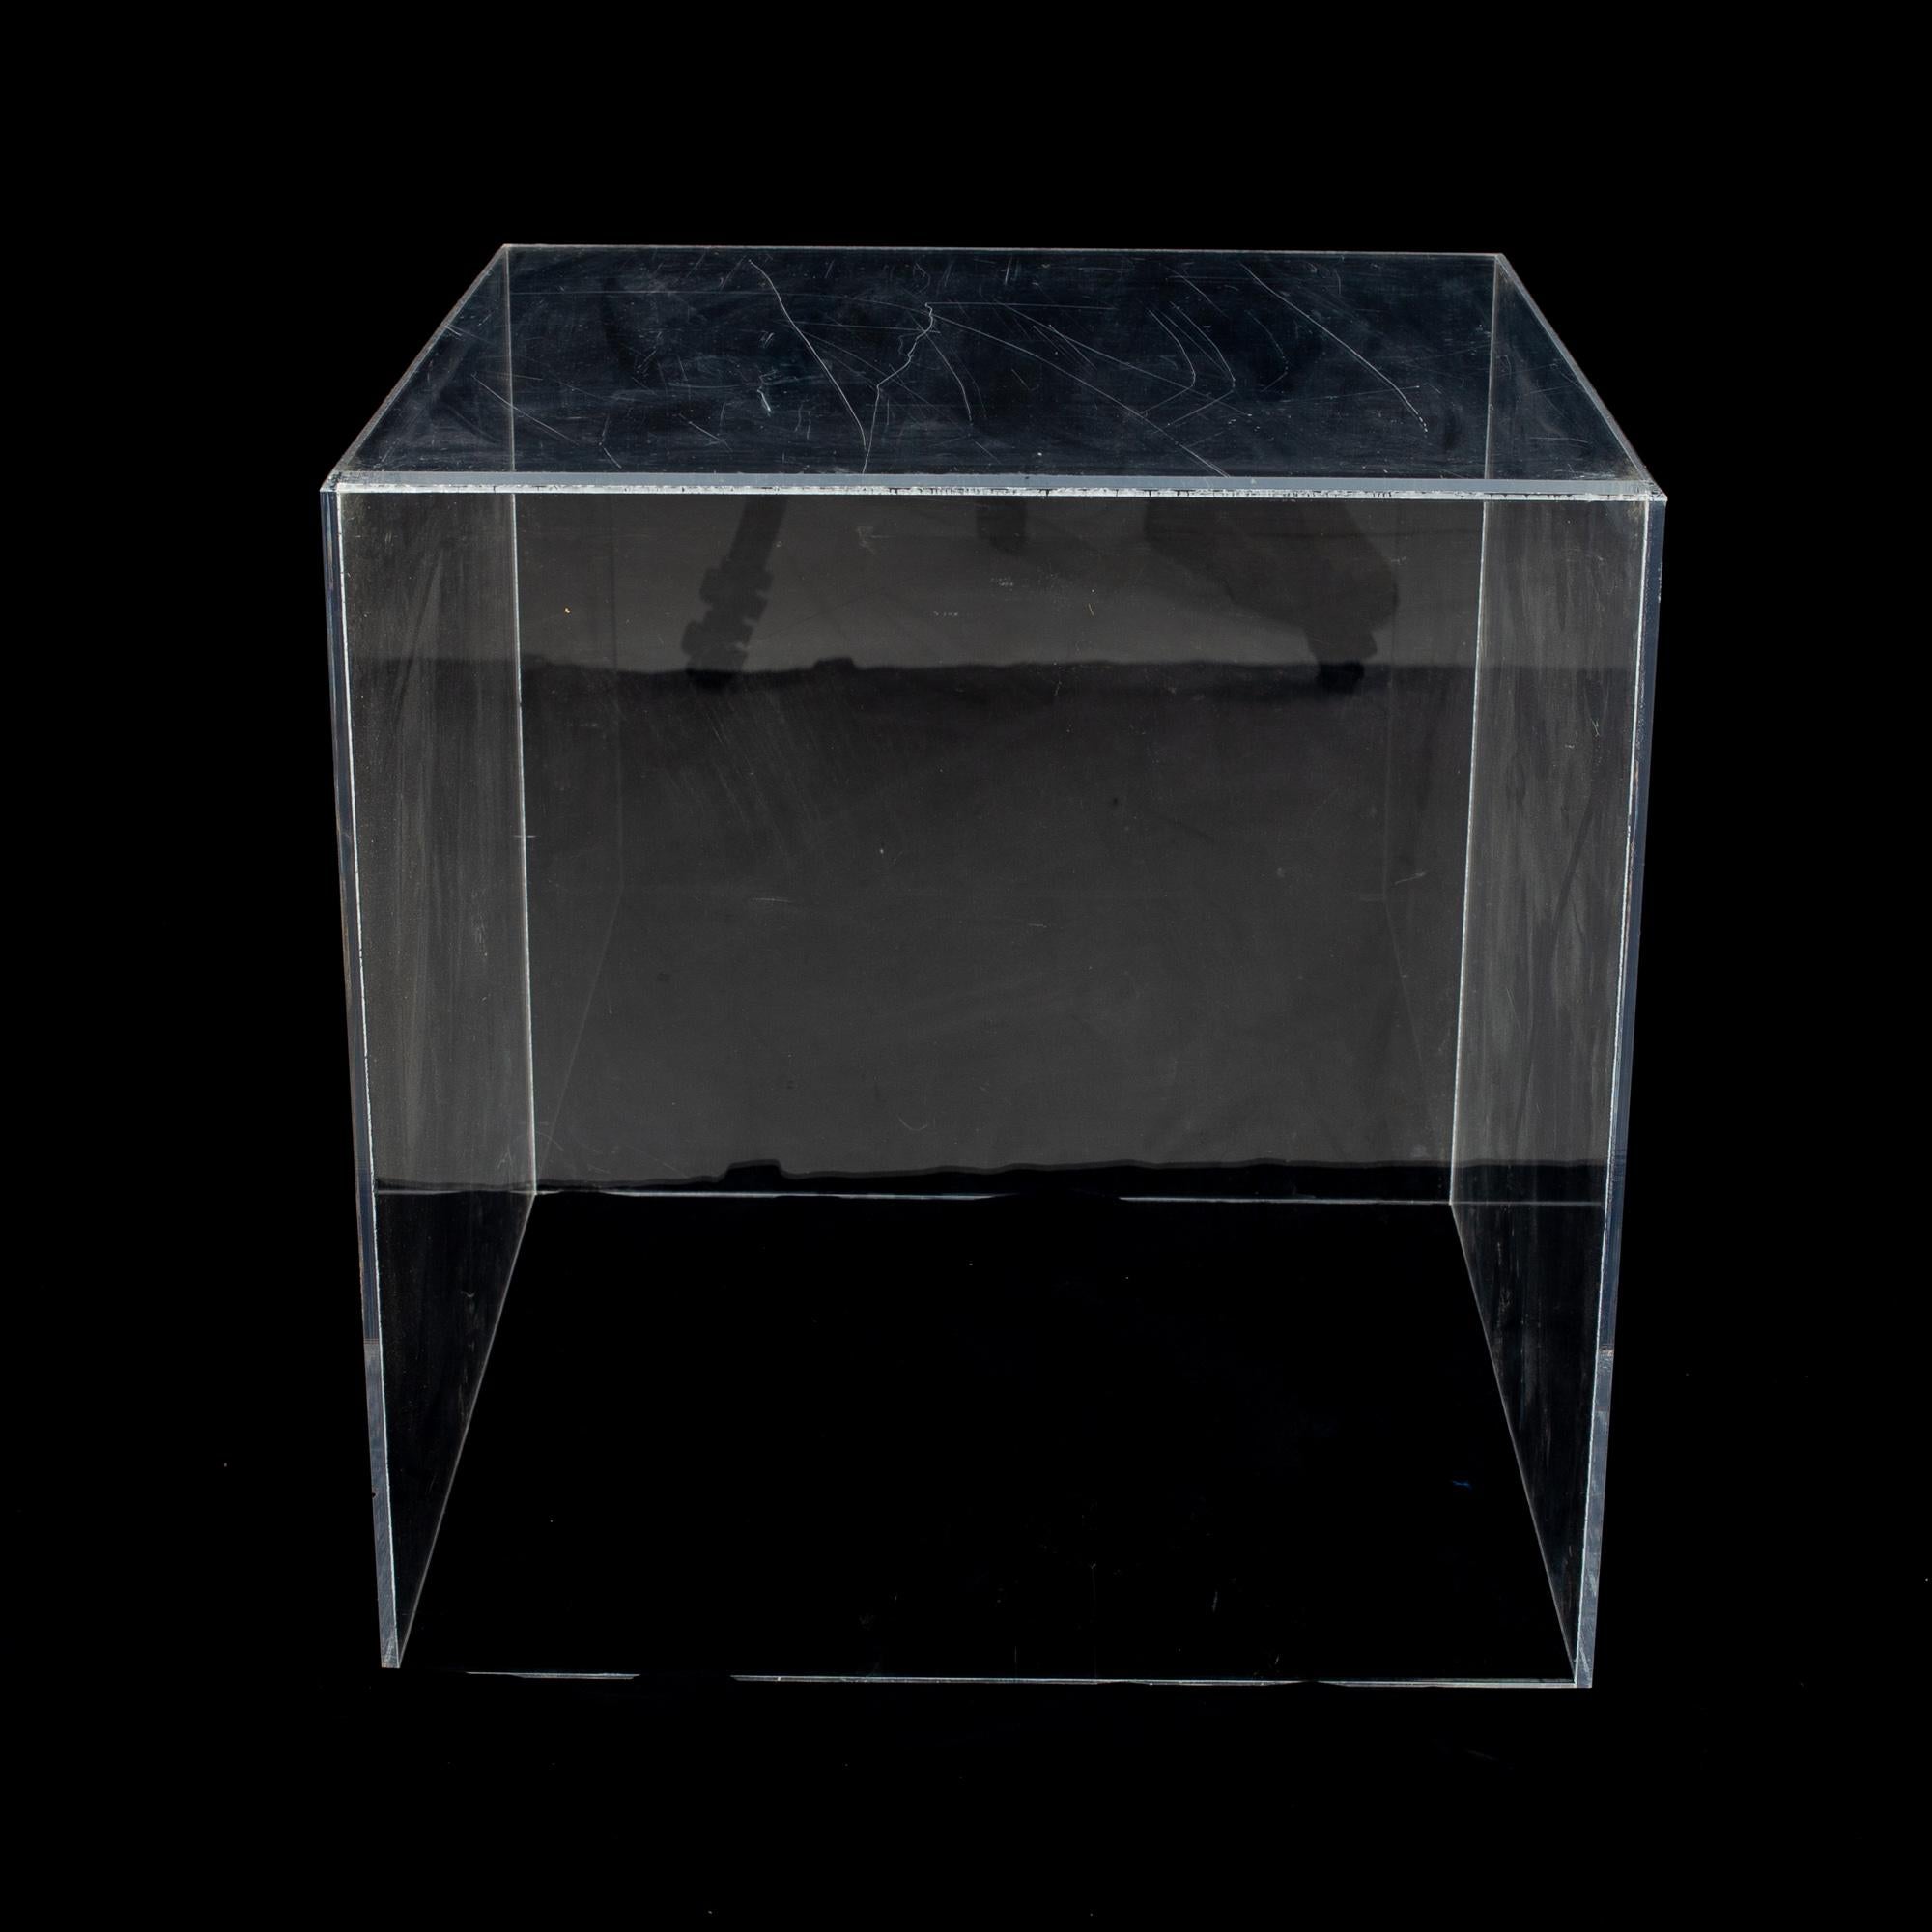 Mid-century clear acrylic cube side table.

The side table measures: 18 wide x 18 deep x 18.25 inches high

All pieces of furniture can be had in what we call restored vintage condition. That means the piece is restored upon purchase so it’s